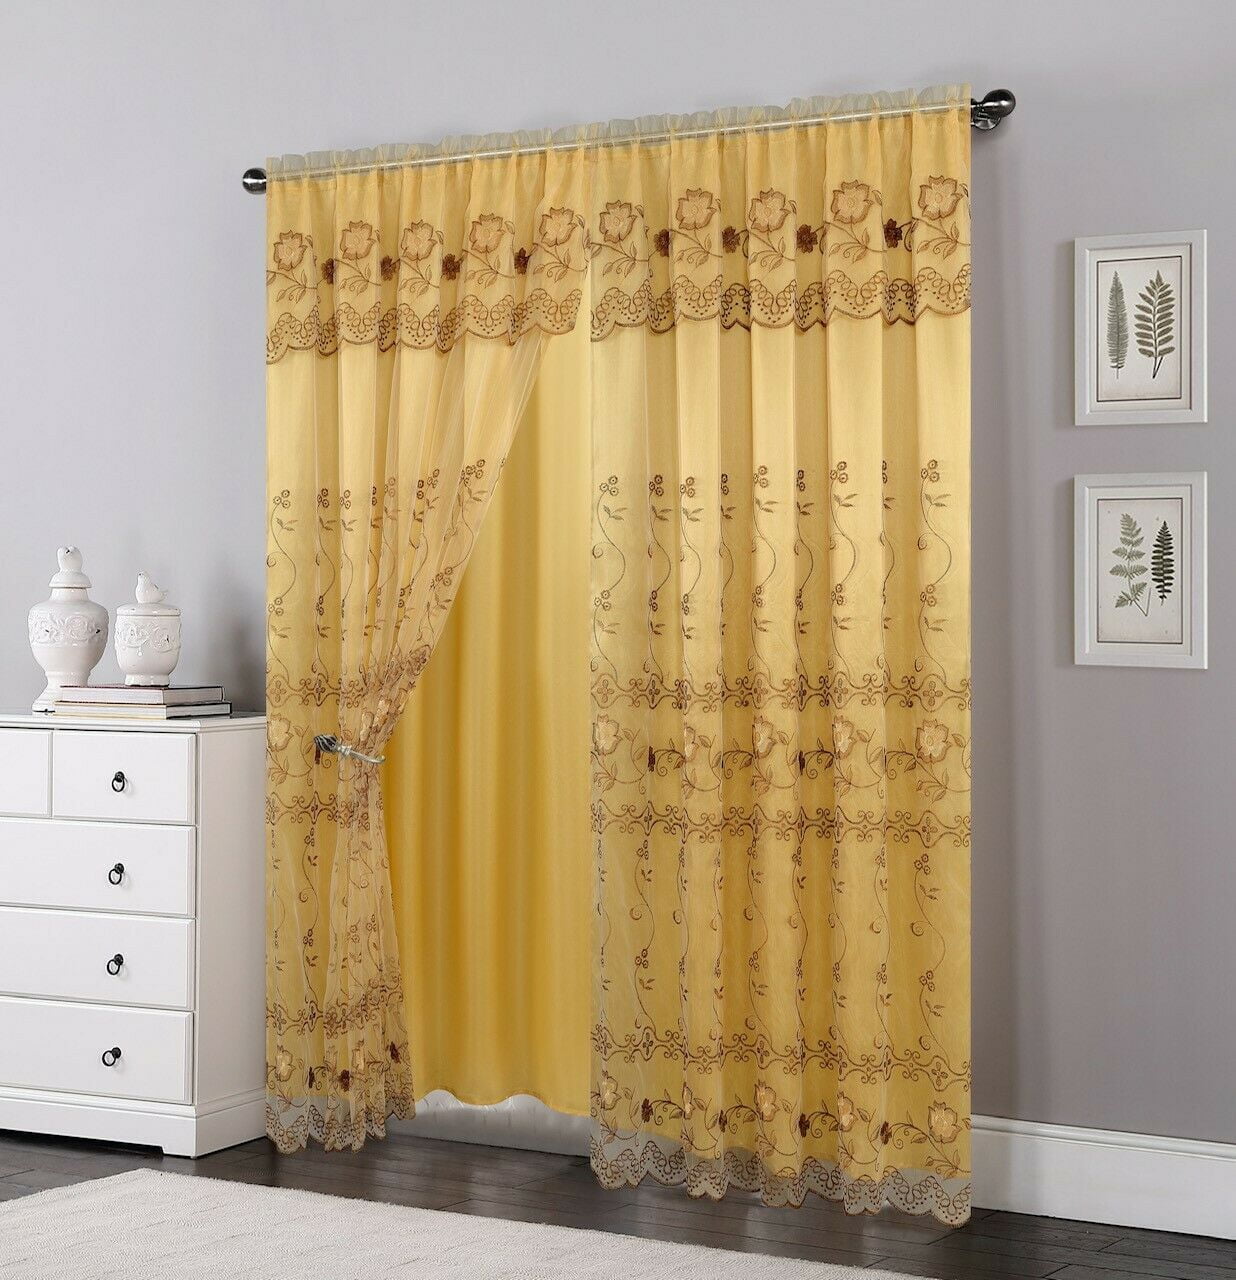 2 Layers Voile Sheer Embroidered Rod Pocket Window Curtain Panel and Valance 